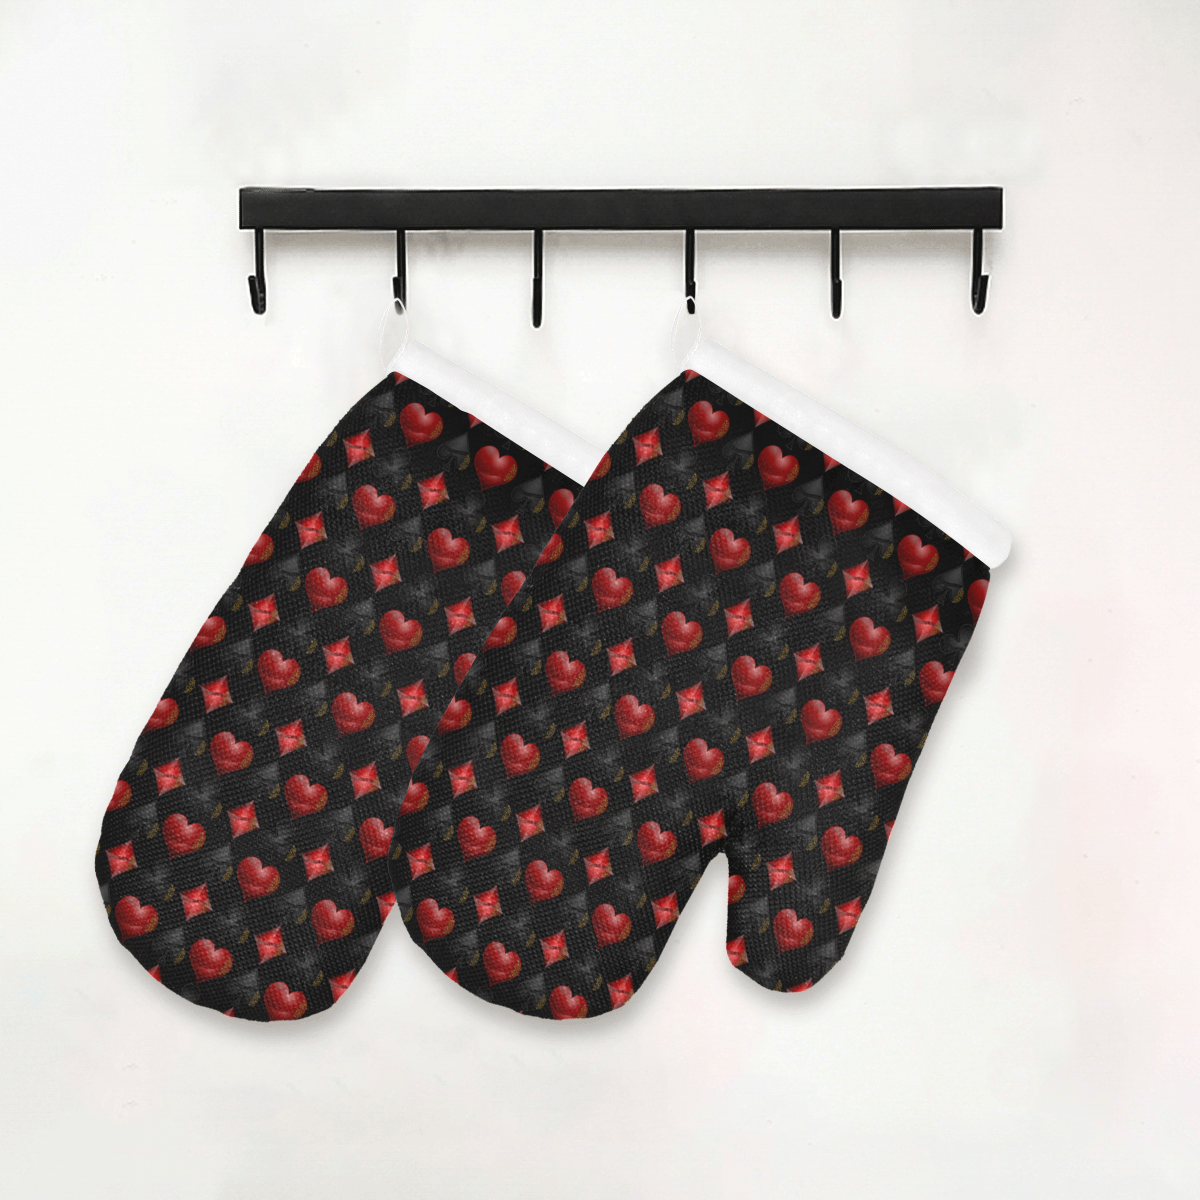 Las Vegas Black and Red Casino Poker Card Shapes on Black Oven Mitt (Two Pieces)